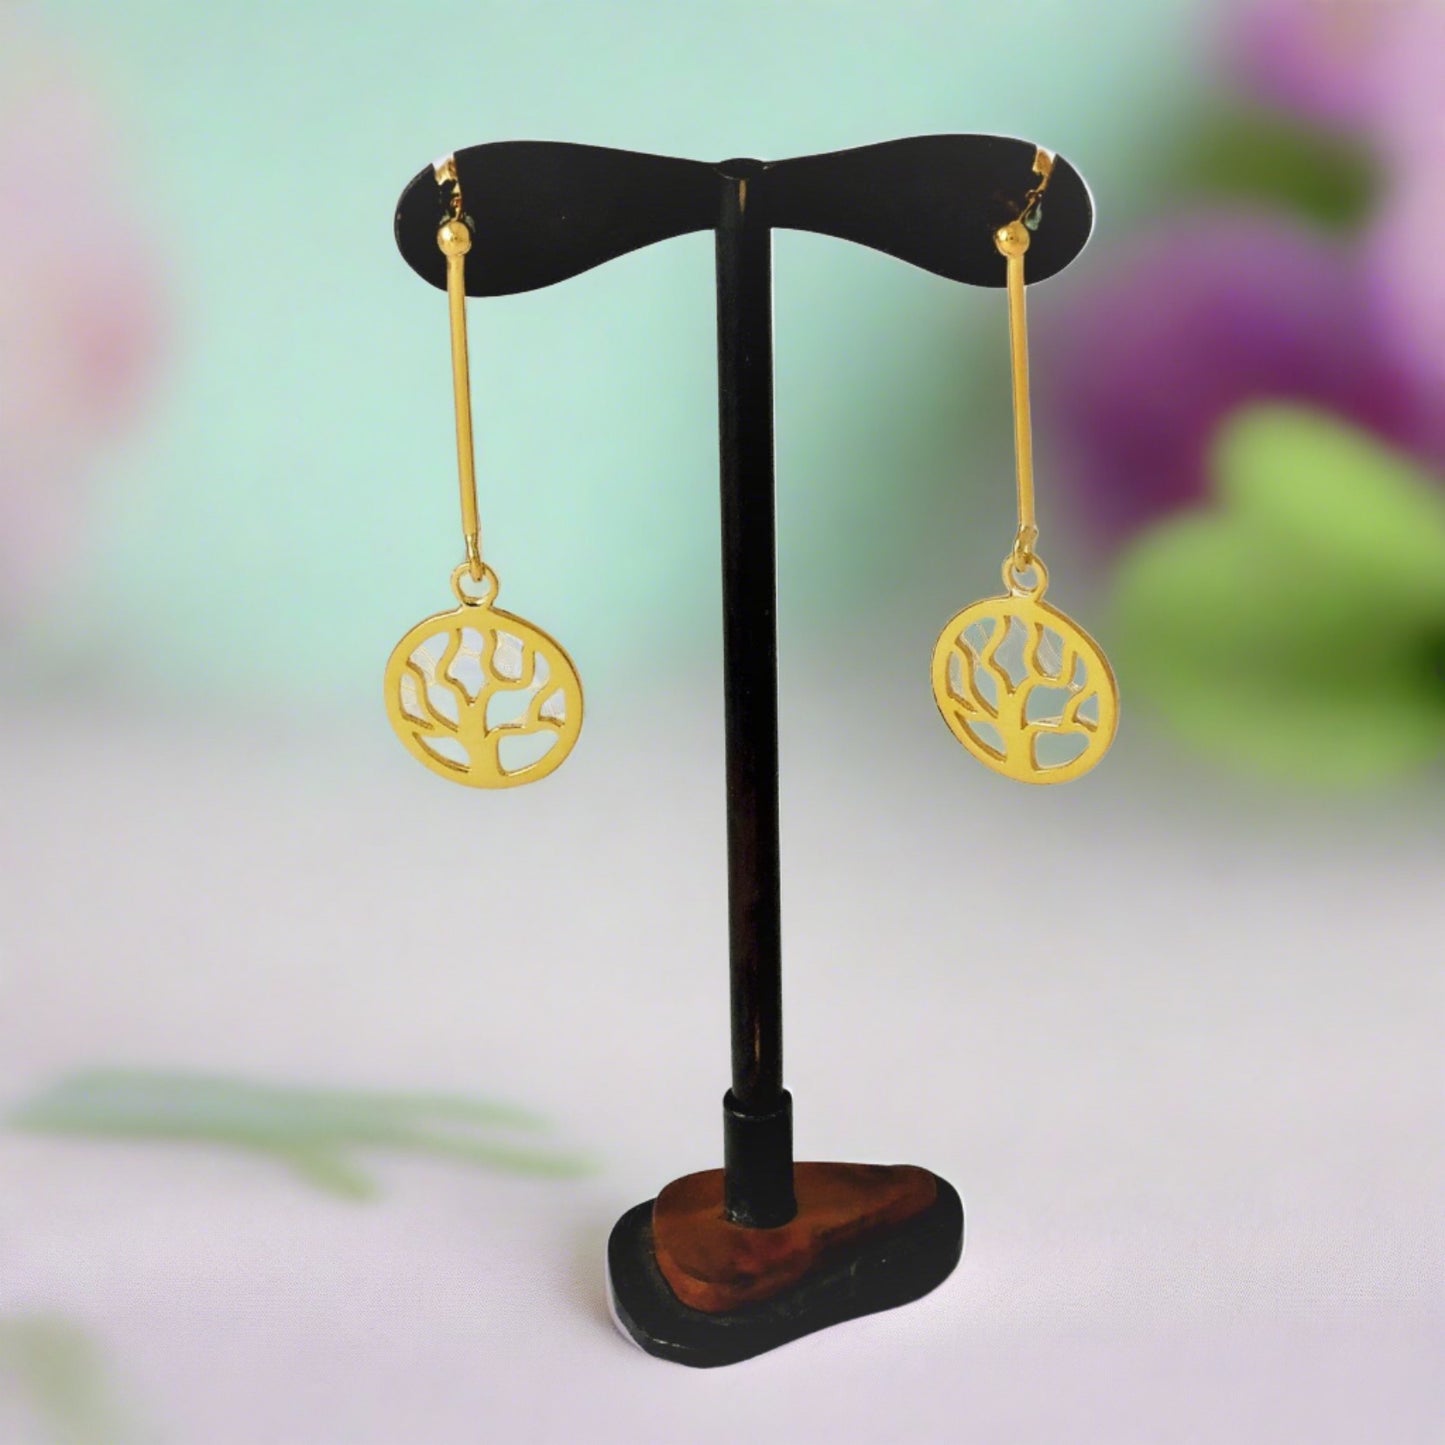 “Earrings made of silver, gold-plated, with  a thick  vertical wire, and beneath the wire hangs a round design with a tree without flowers and leaves.The design is perforated and elegant.”